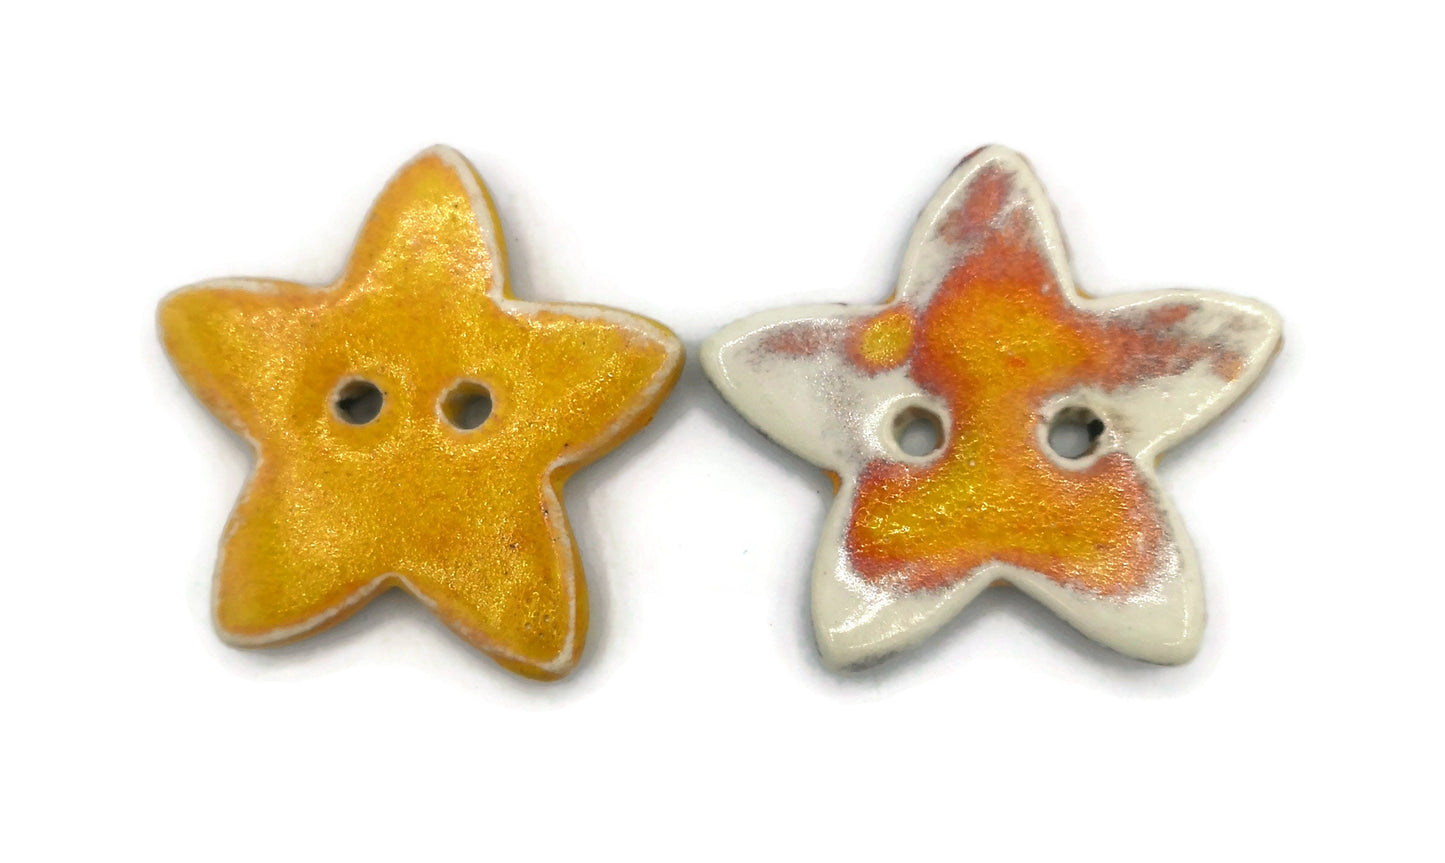 Set Of 2 Coat Buttons, Handmade Ceramic Sewing Buttons Star Shaped, Sewing Supplies And Notions, Custom Buttons For Jewelry Making - Ceramica Ana Rafael